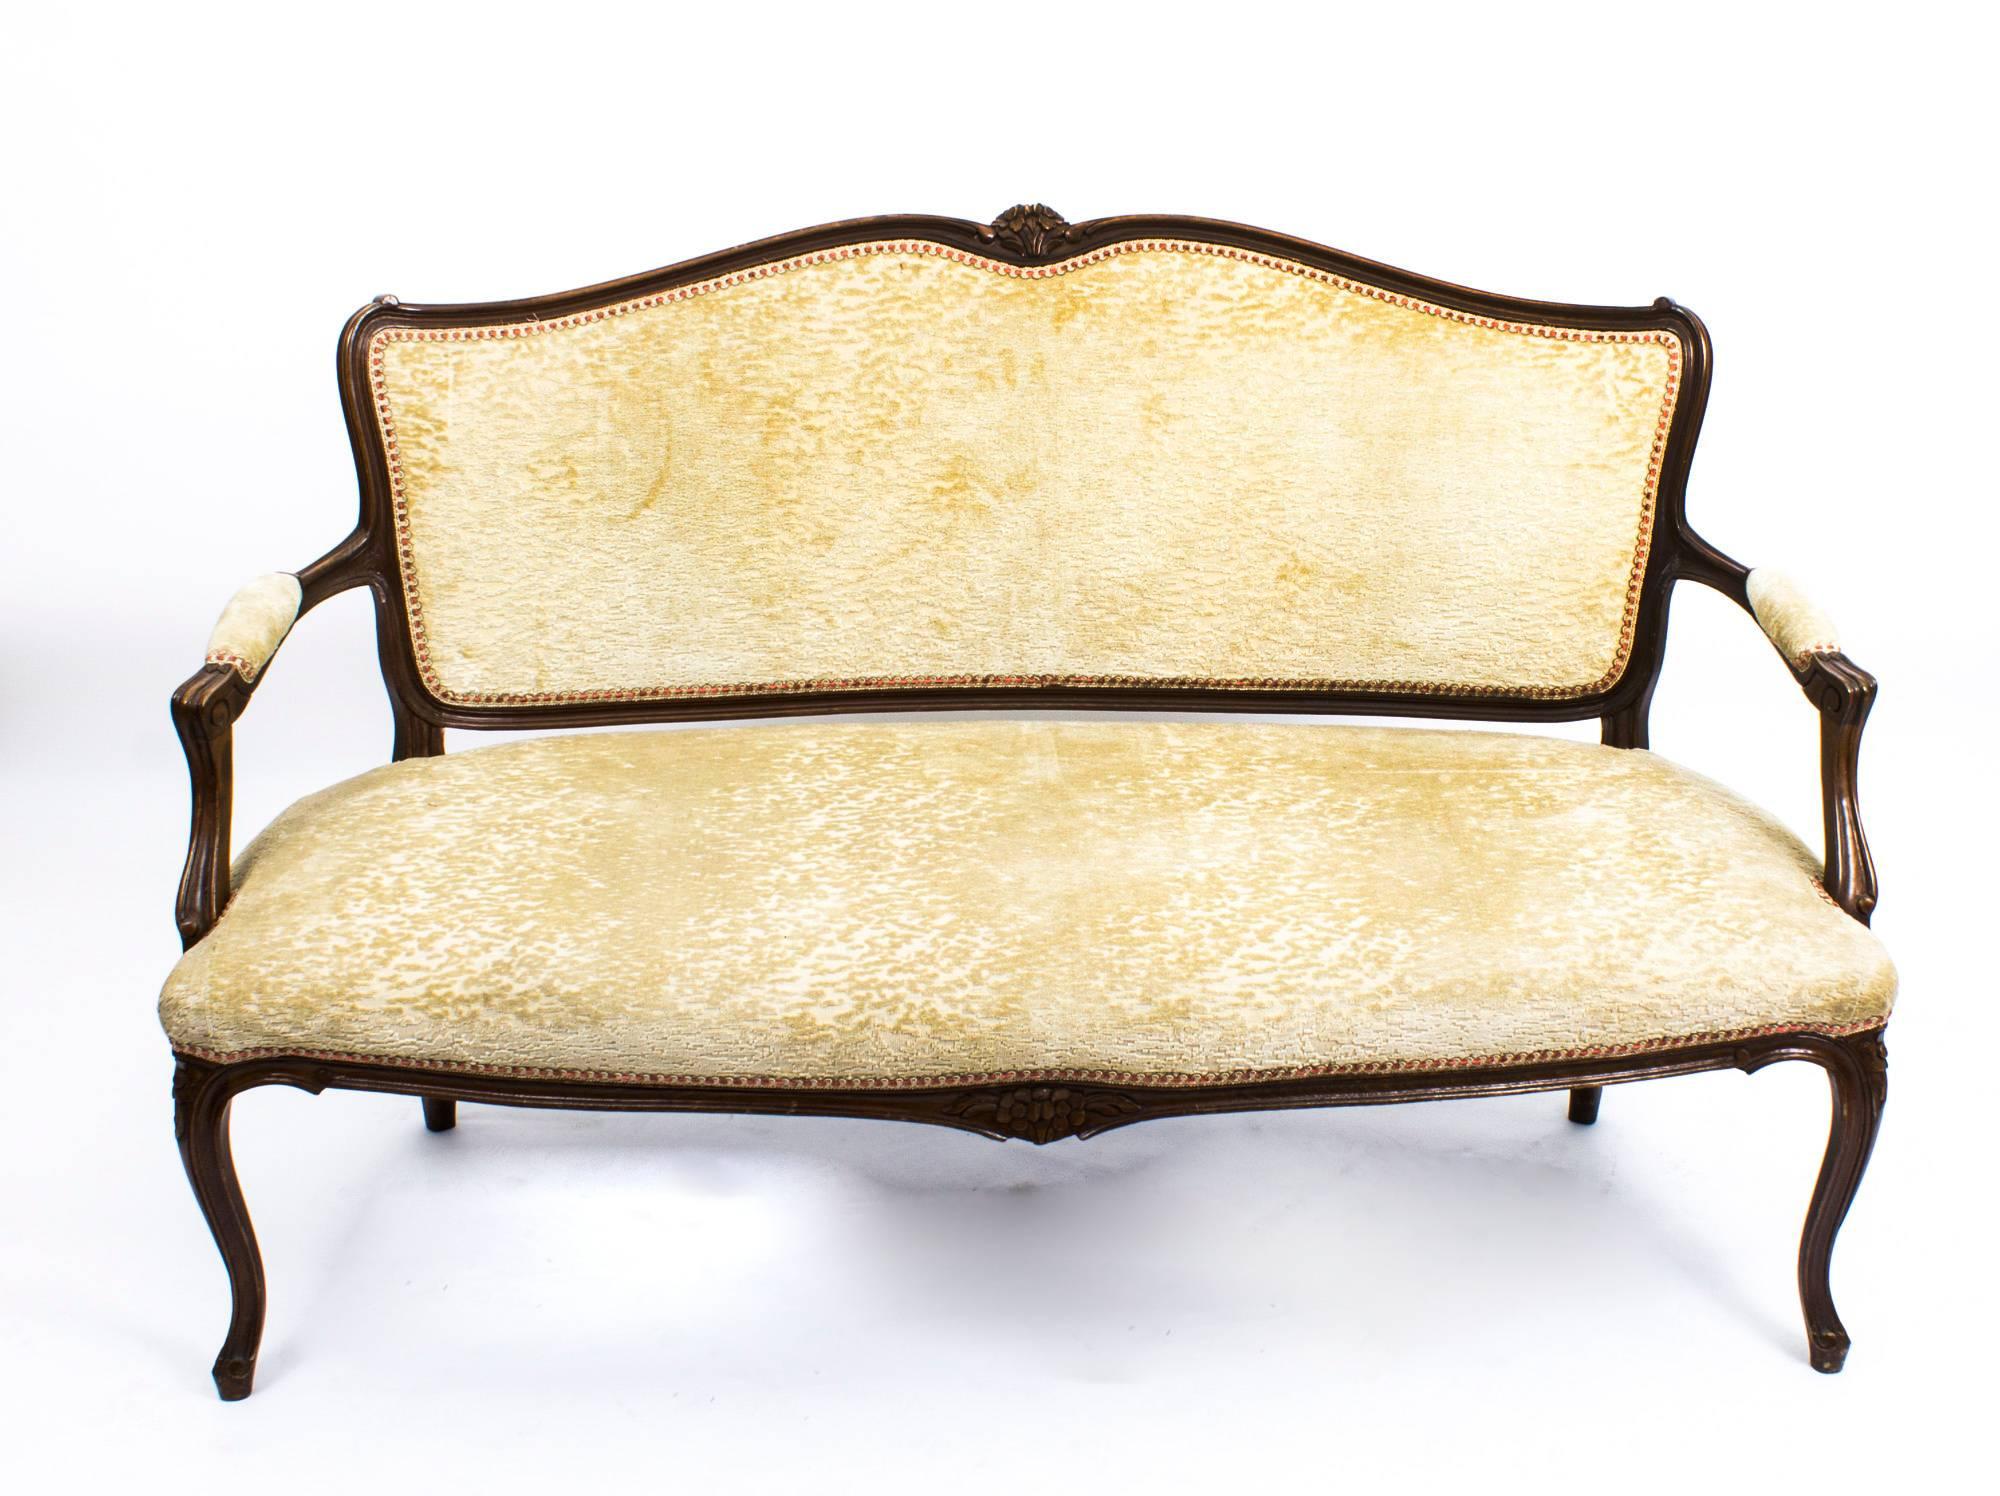 This an antique French sofa, circa 1900 in date.

This sofa was made from solid walnut and has been beautifully reupholstered in Fine fabric from the exclusive Beacon Hill range of fabrics.

It has wonderful hand-carved decoration and is raised